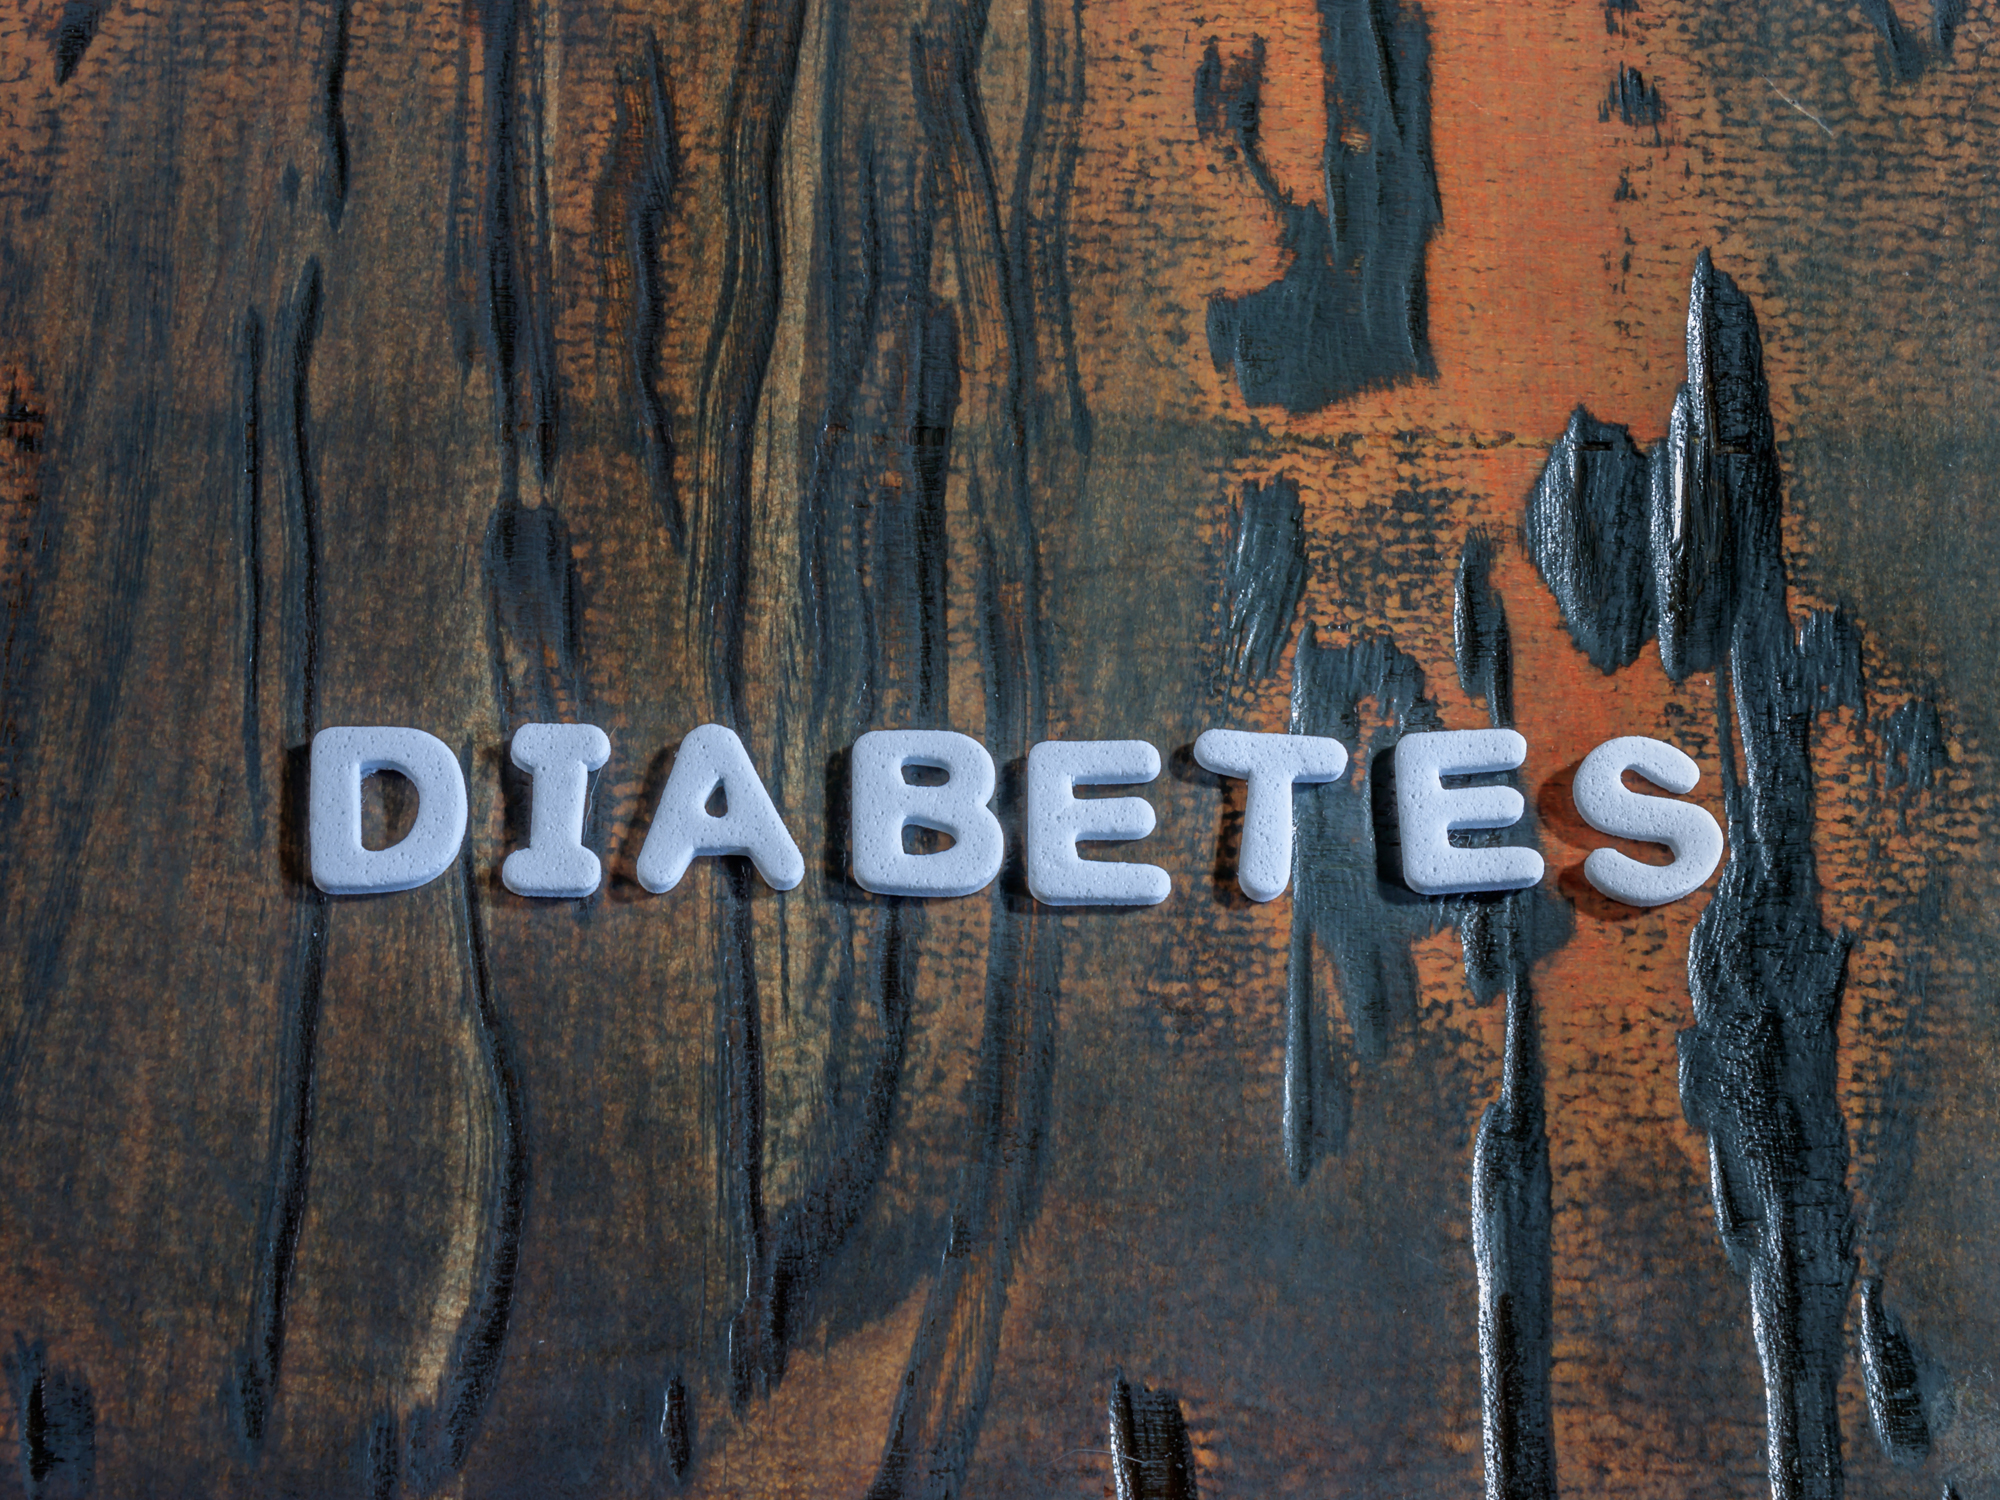 Proof curing type 2 diabetes is simpler than you thought